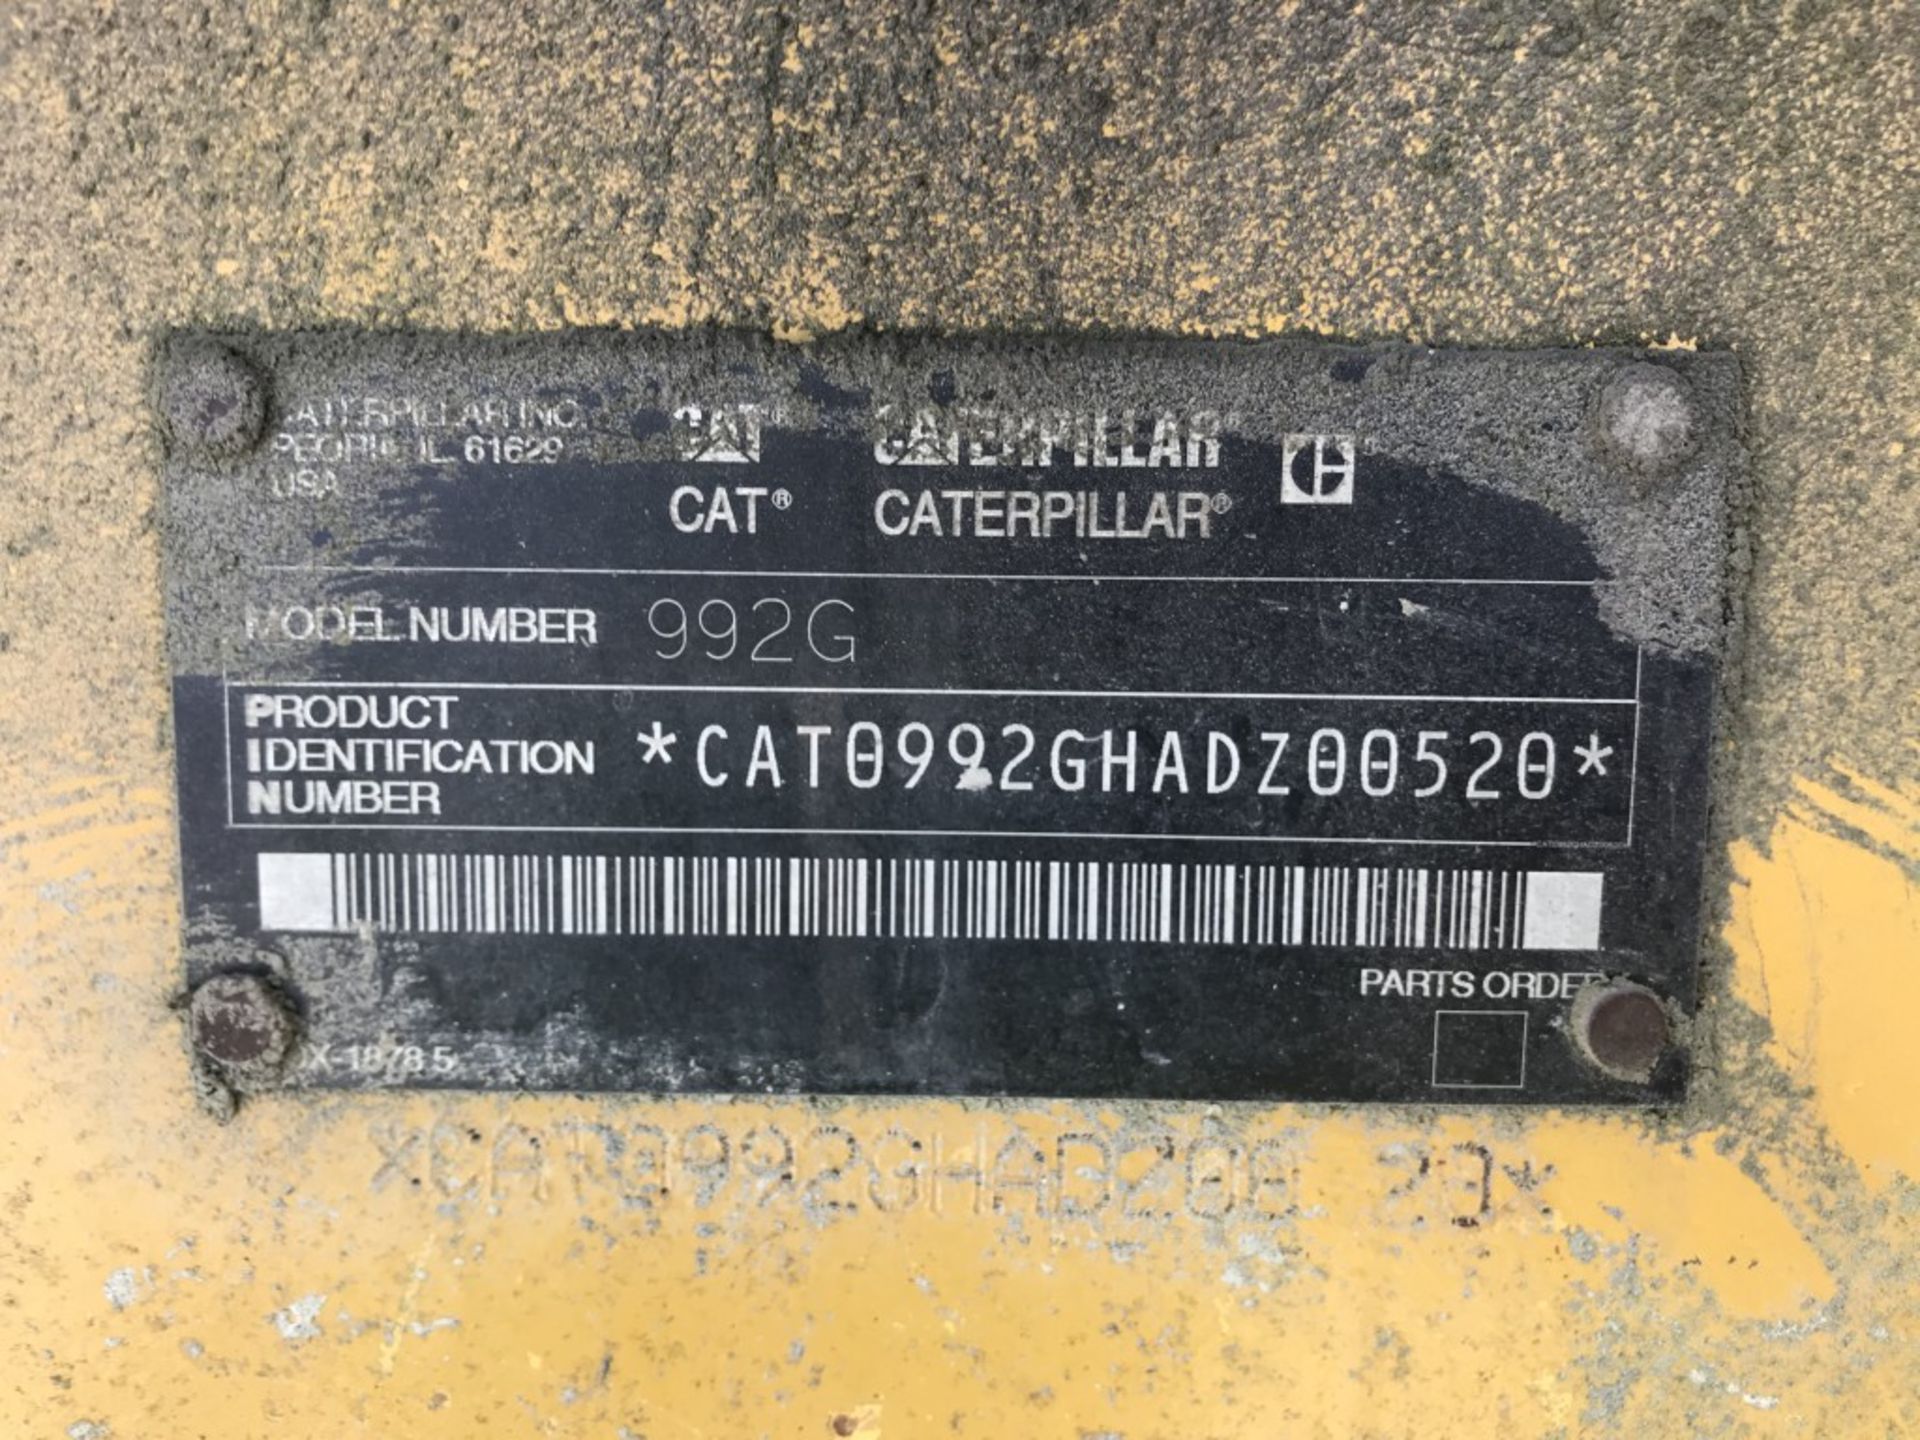 CATERPILLAR 992G WHEEL LOADER FOR PARTS, S/N: CAT0992GHADZ00520, CAT DIESEL ENGINE, MISSING A LOT OF - Image 15 of 15